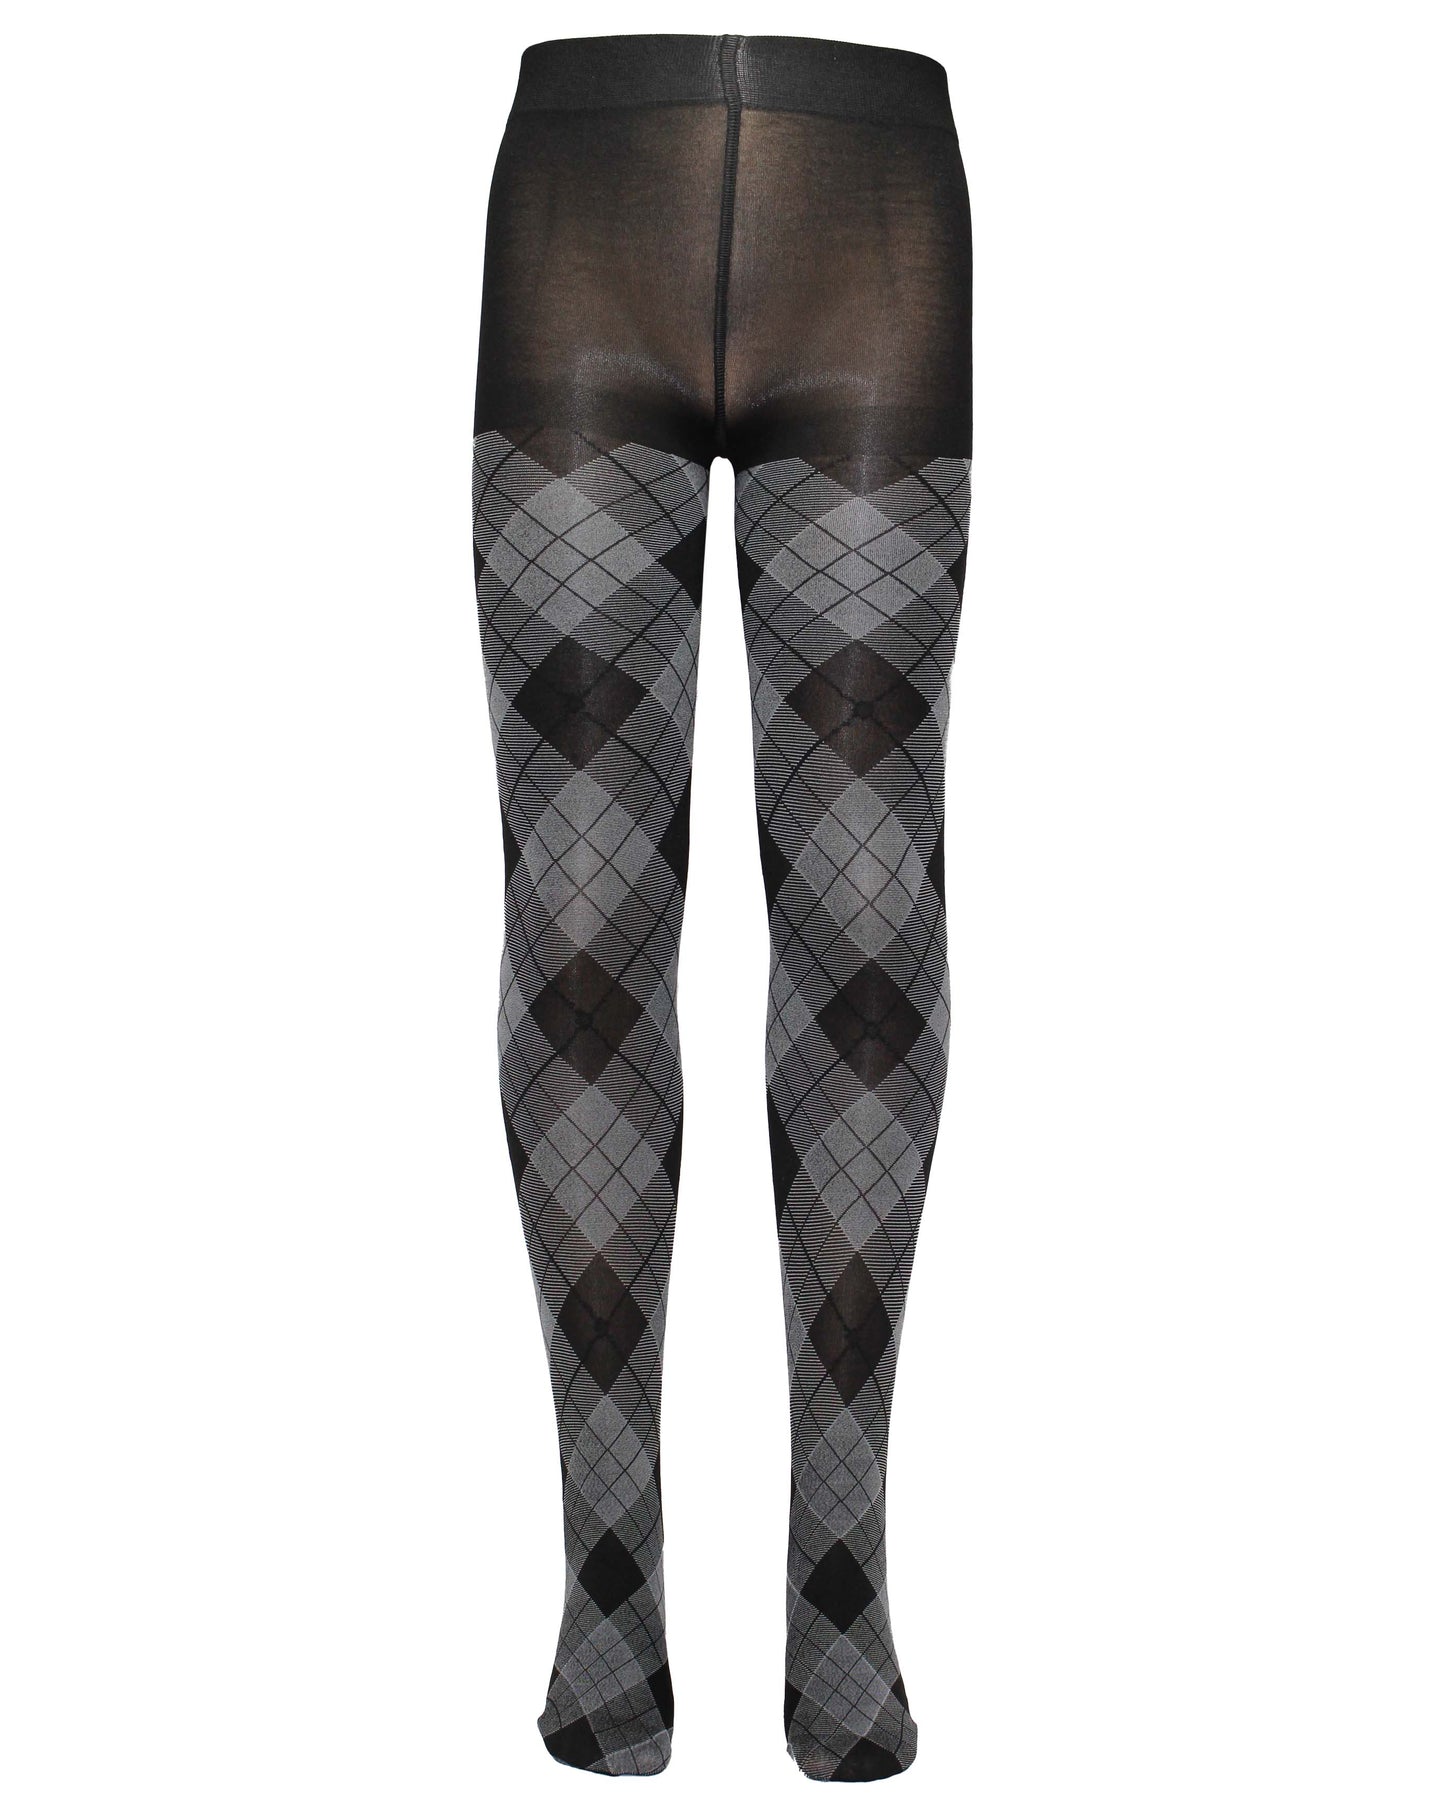 Omsa Serenella Shire Collant - Black opaque children's fashion tights with a light grey tartan / argyle style pattern.